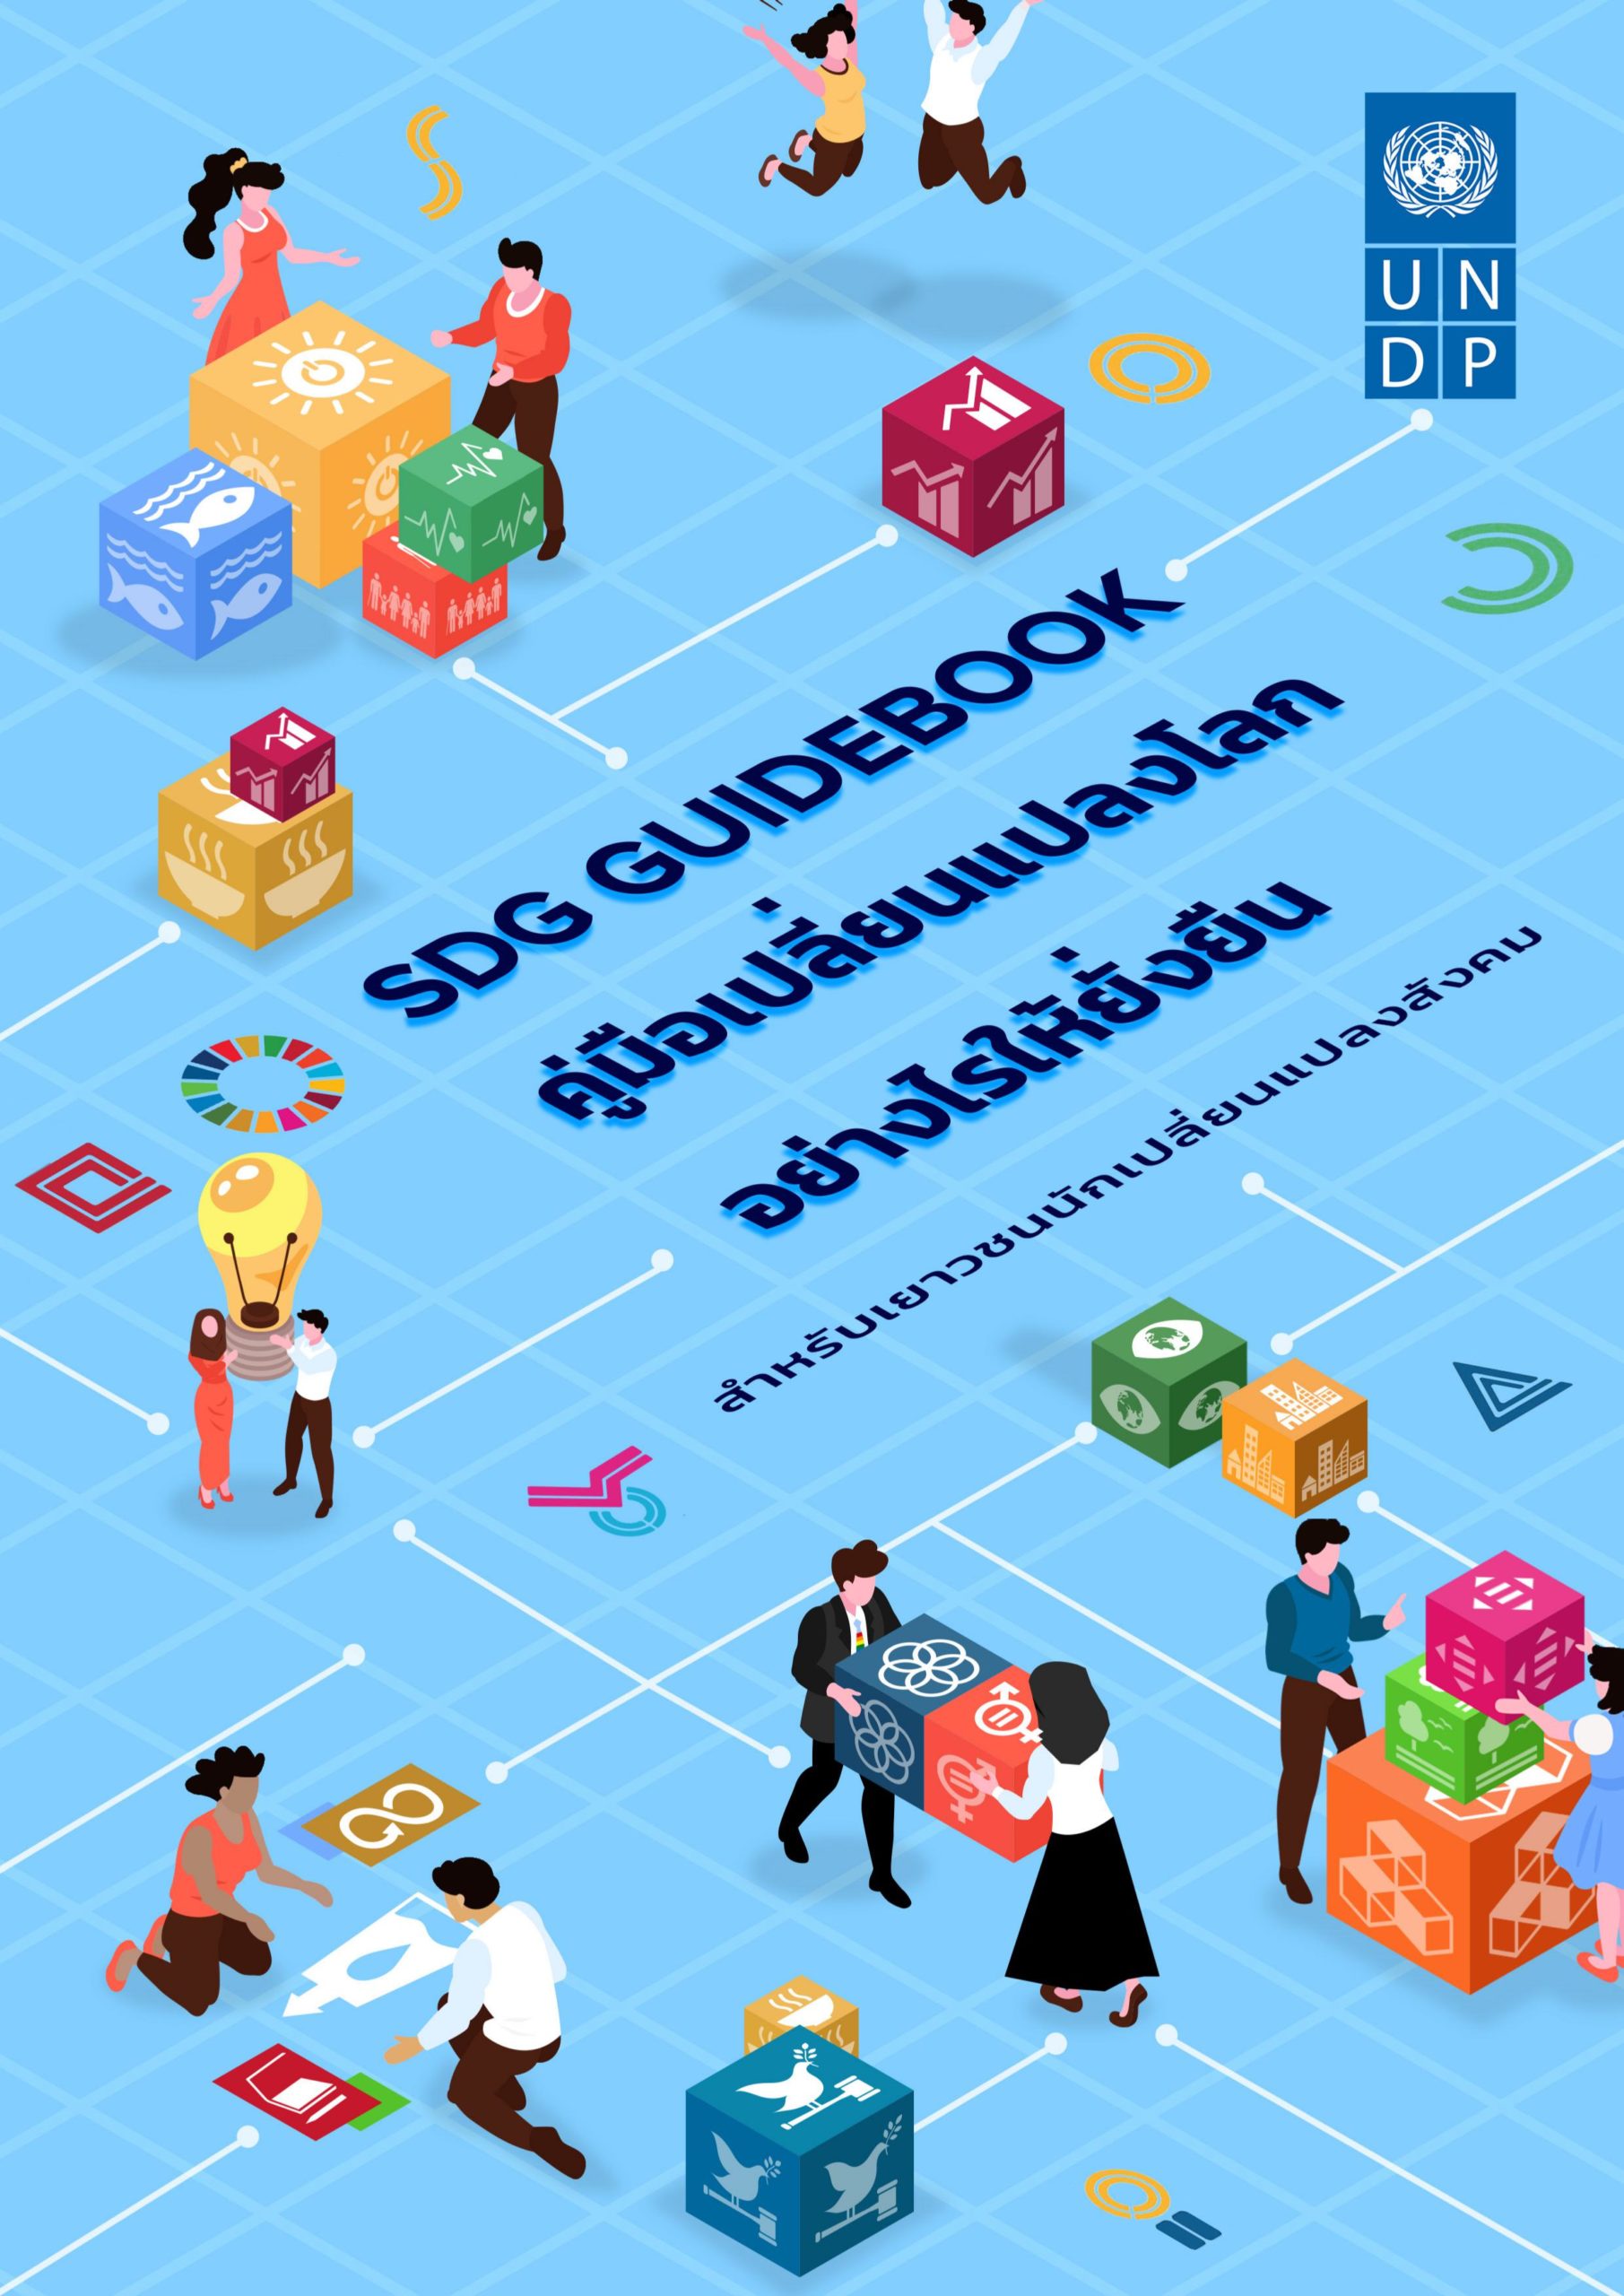 SDG Guidebook for Youth in Action